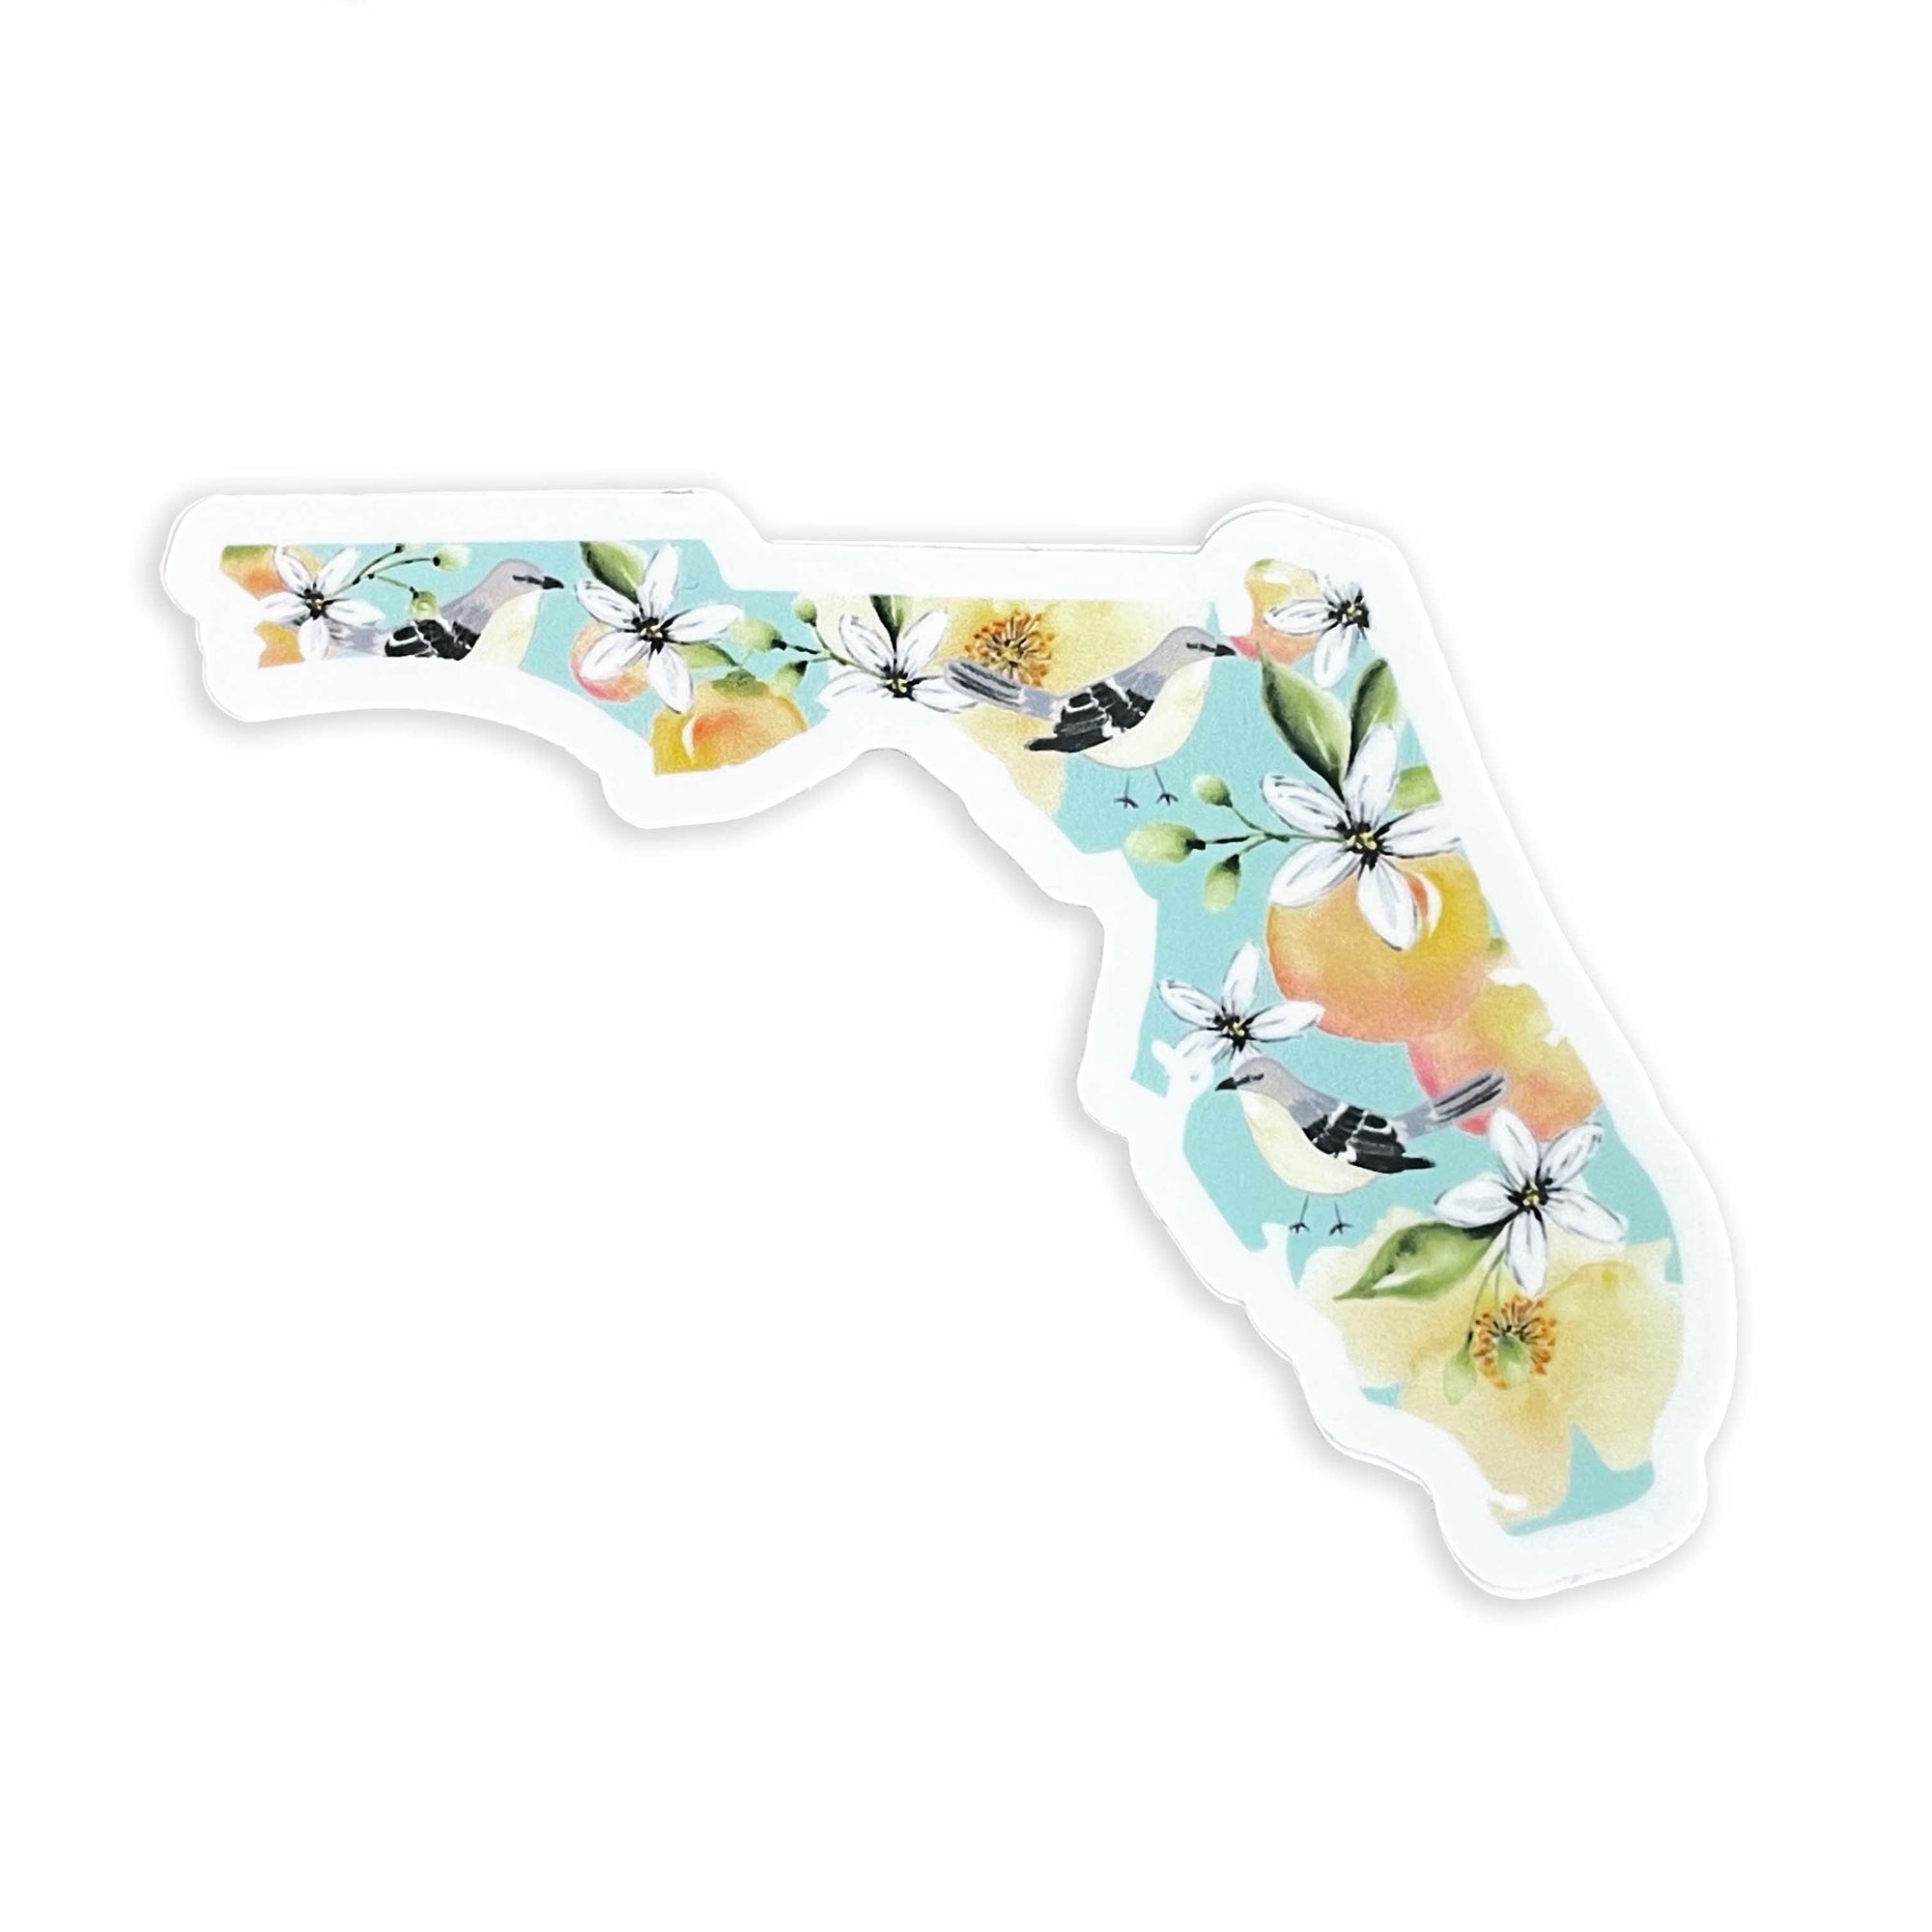 Florida shaped sticker with mockingbirds and oranges and orange blossoms on teal background